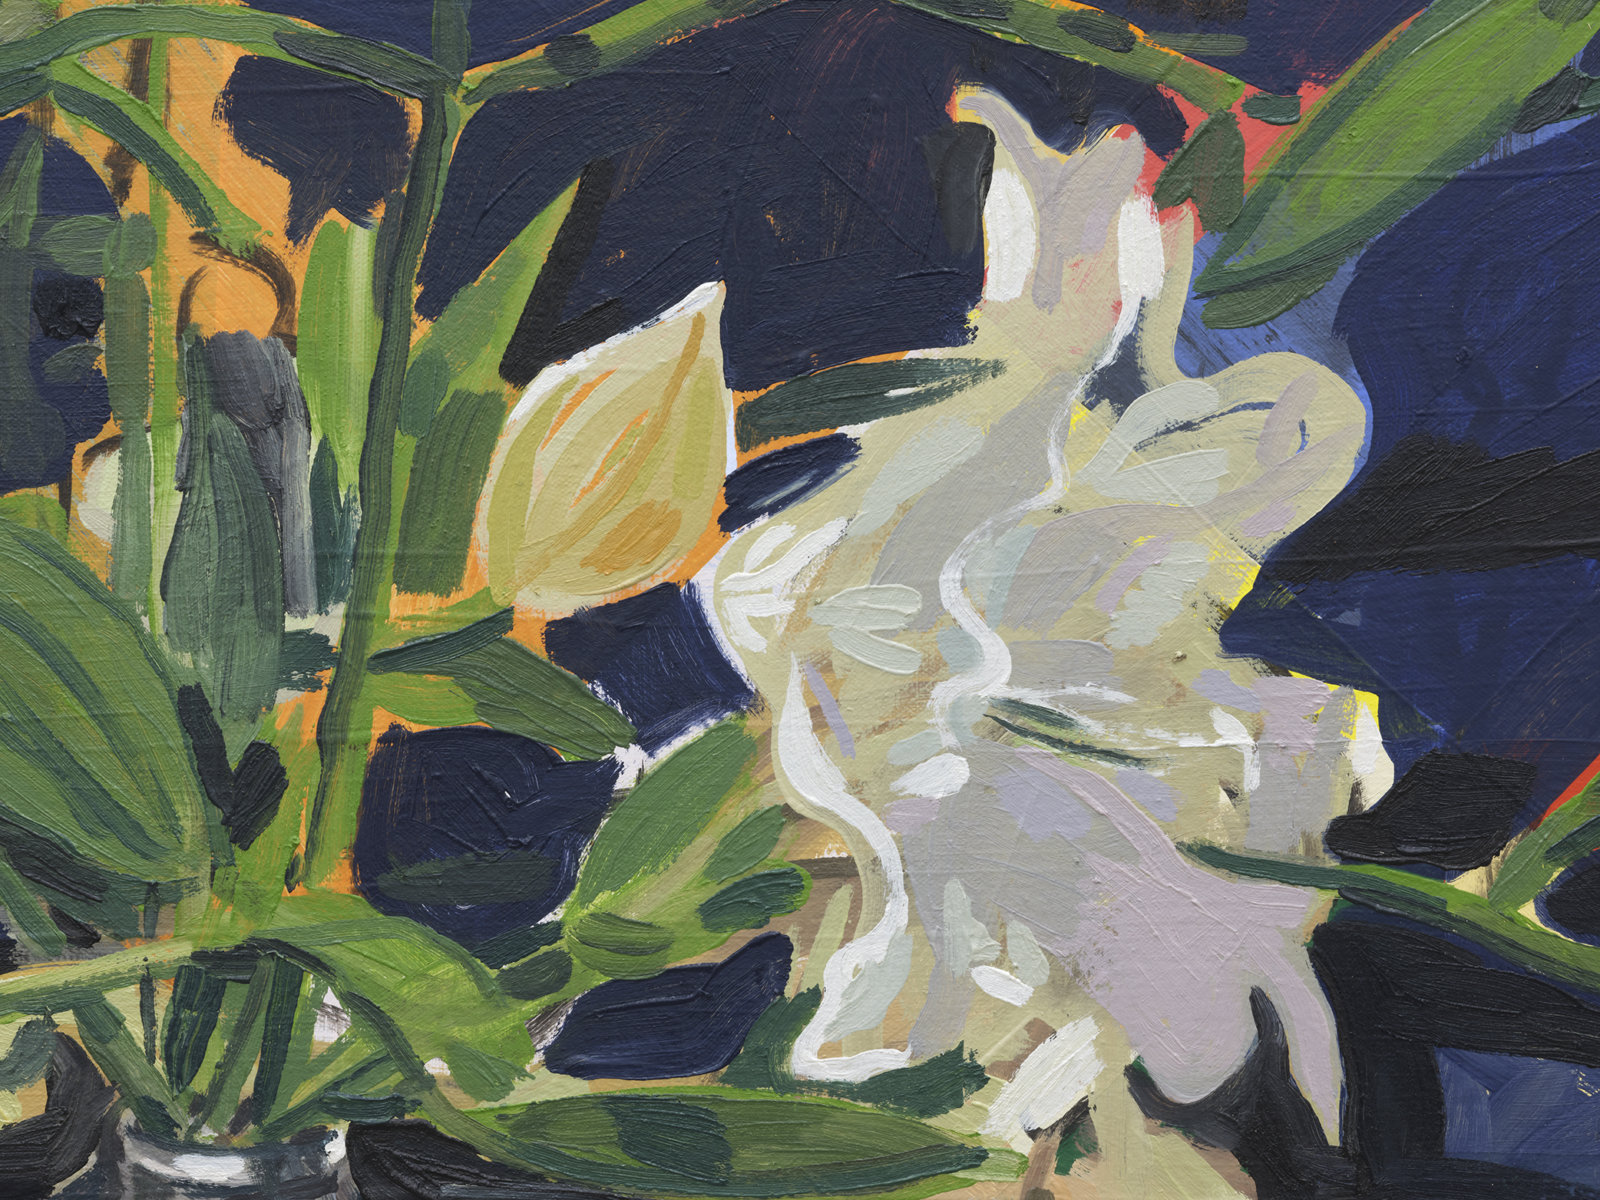 Damian Moppett, Lilies (Pink) (detail), 2020, oil on canvas, 34 x 34 in. (86 x 86 cm)